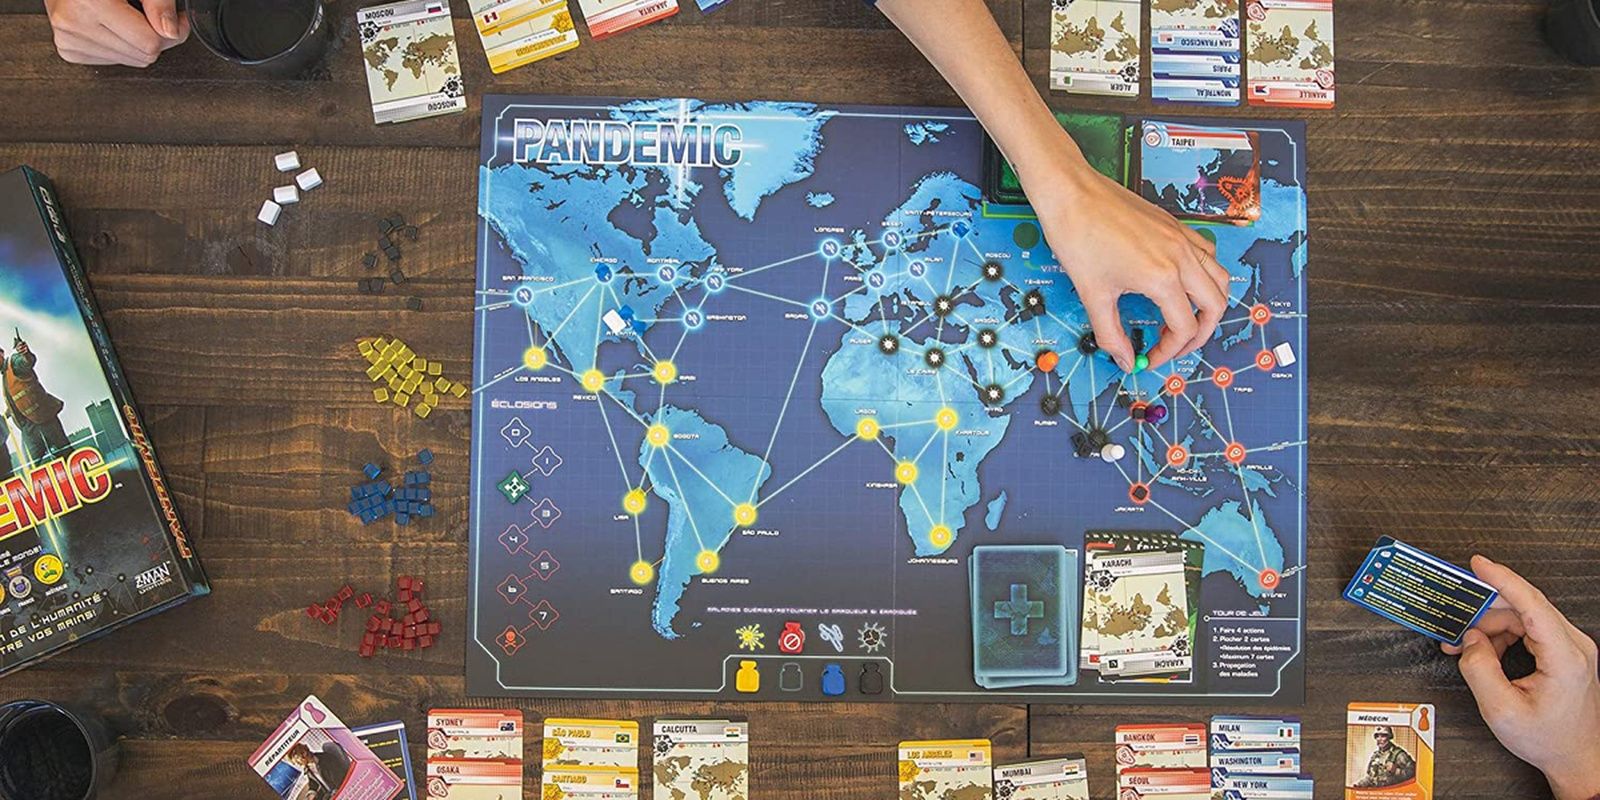 An in-progress game of Pandemic